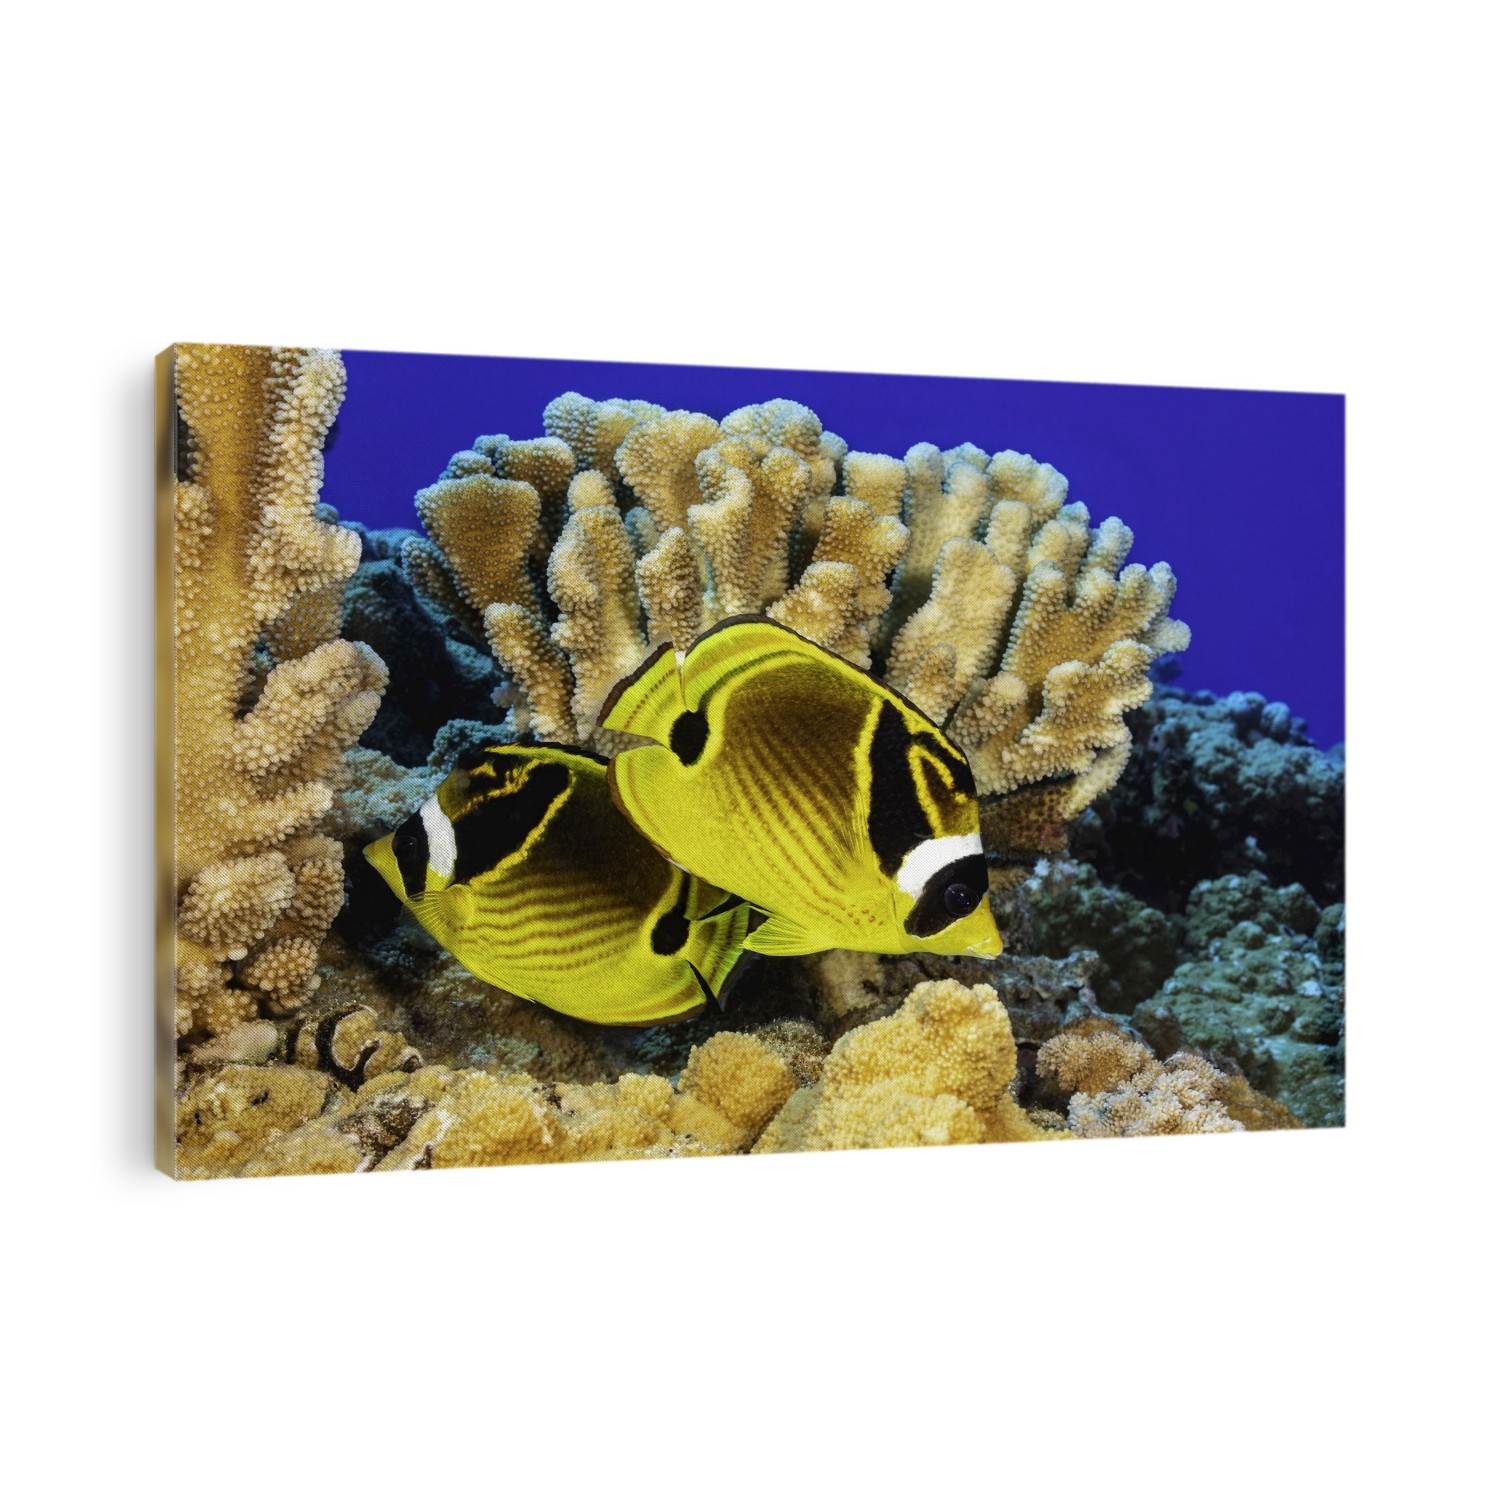 Two Raccoon Butterflyfish (Chaetodon lunula) swimming side by side in a coral reef beside antler coral; Hawaii, United States of America